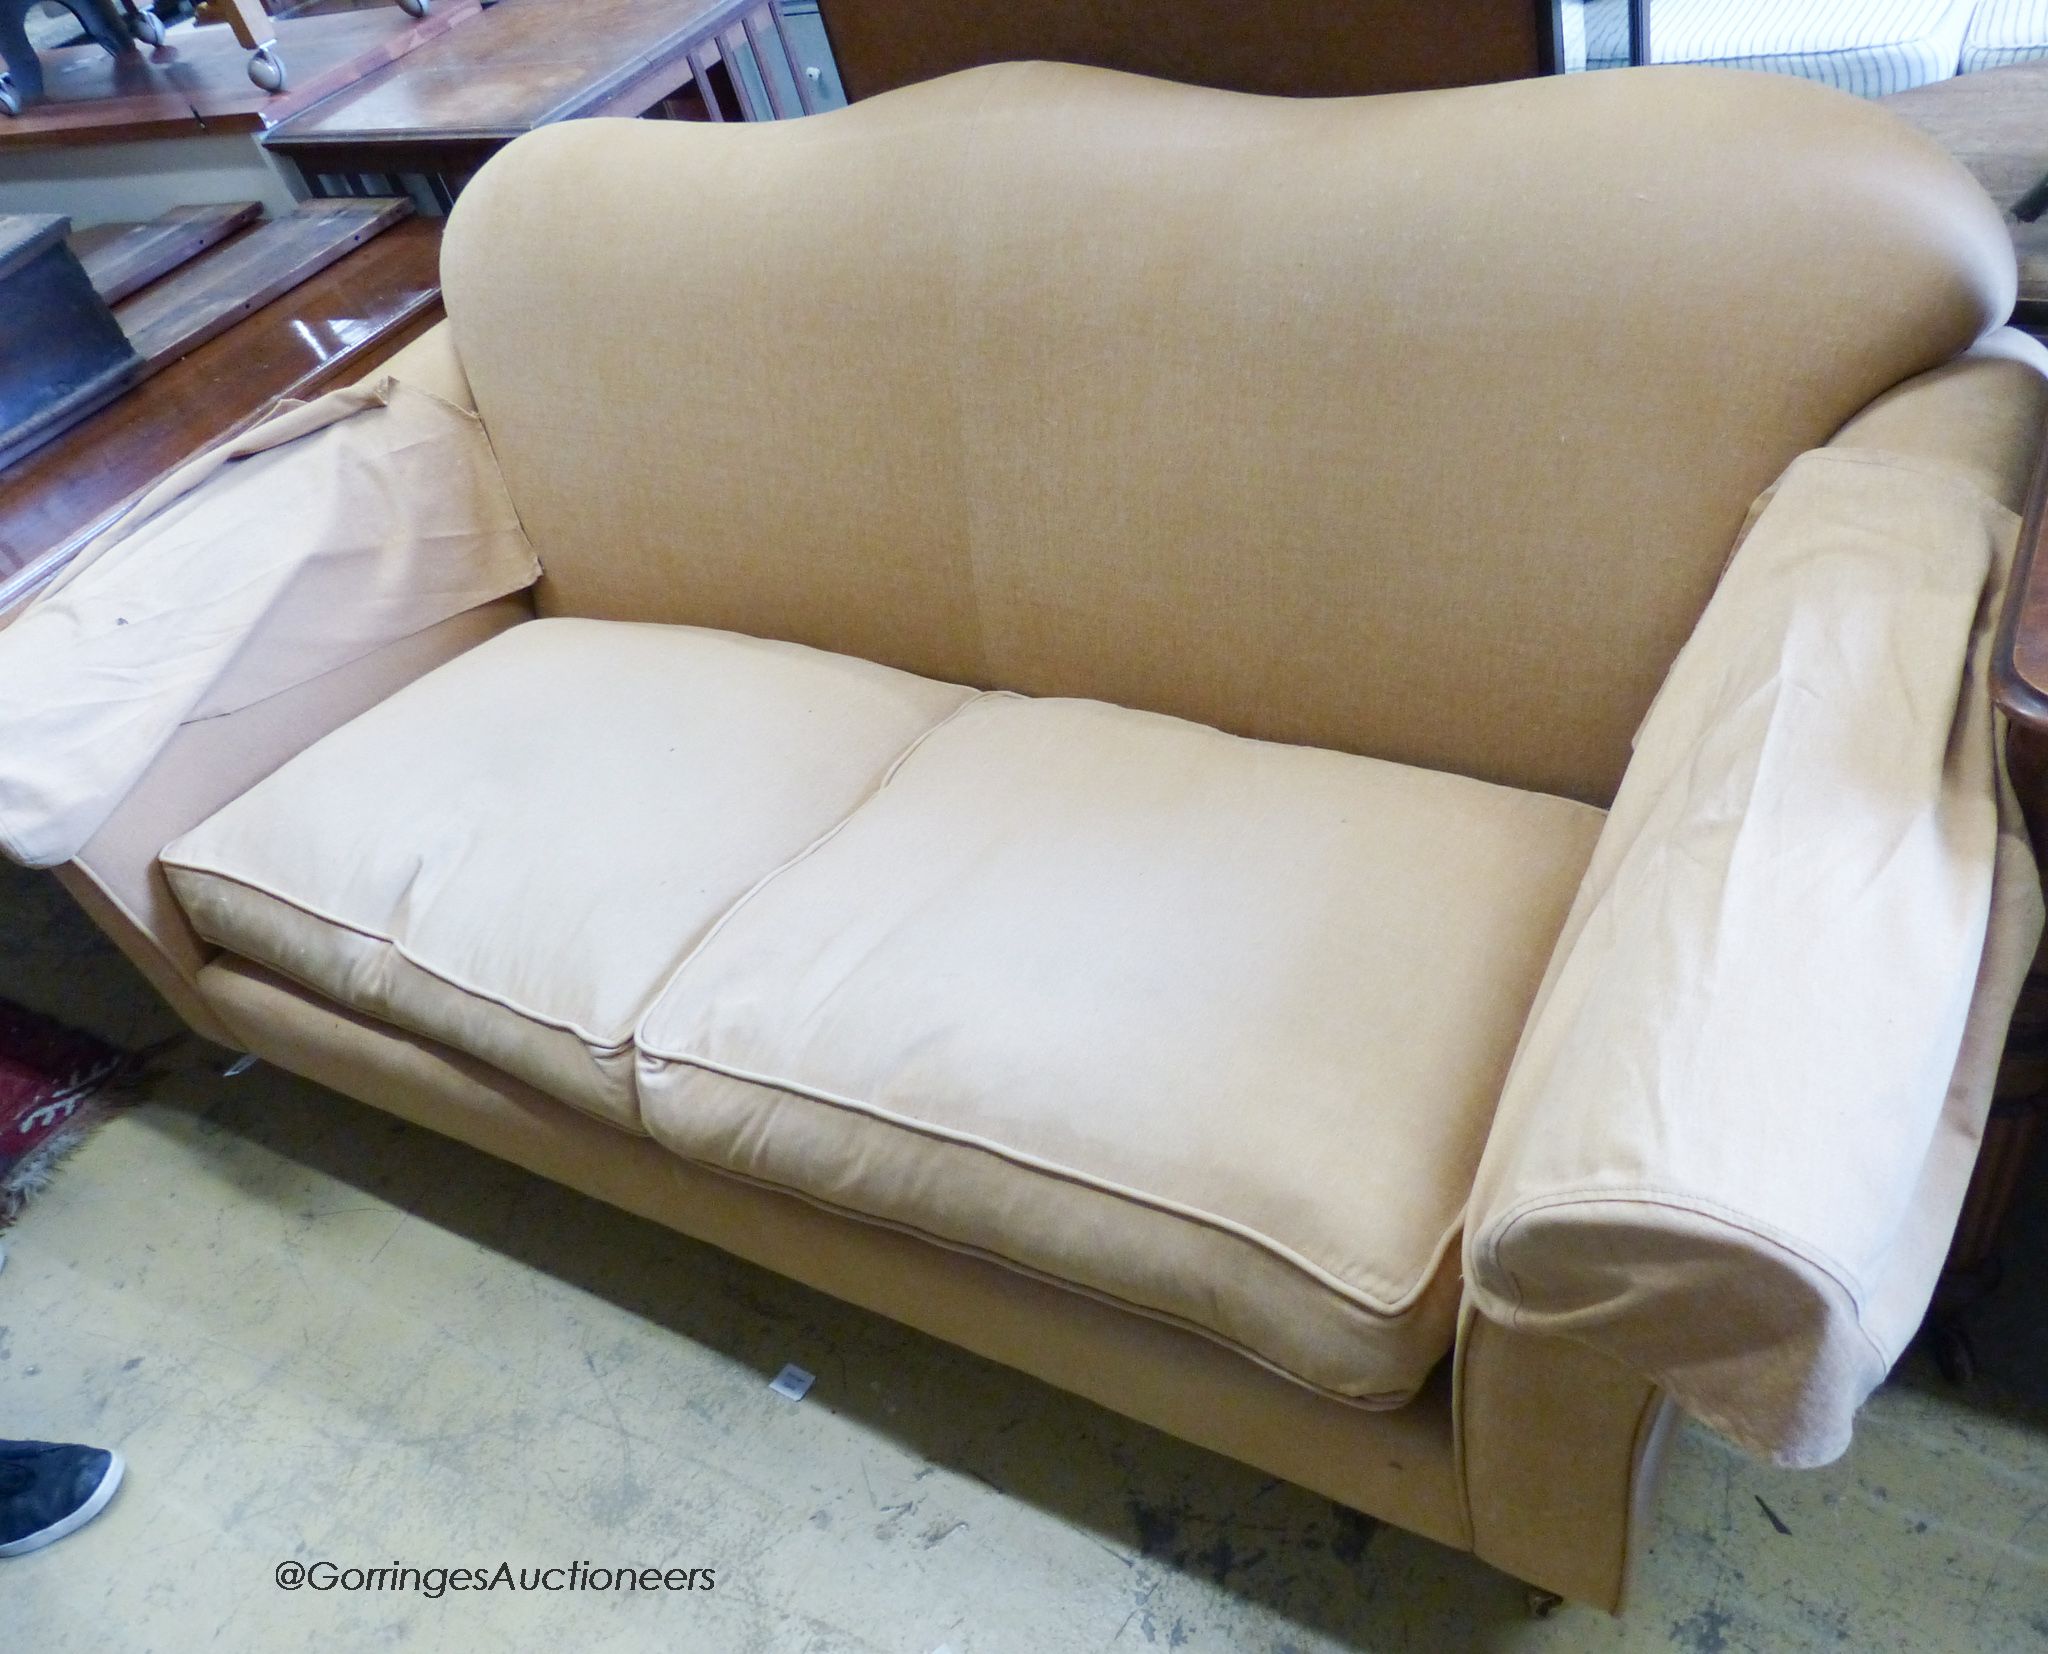 A large modern two seater settee upholstered in beige fabric W-200, D-98, H-94.